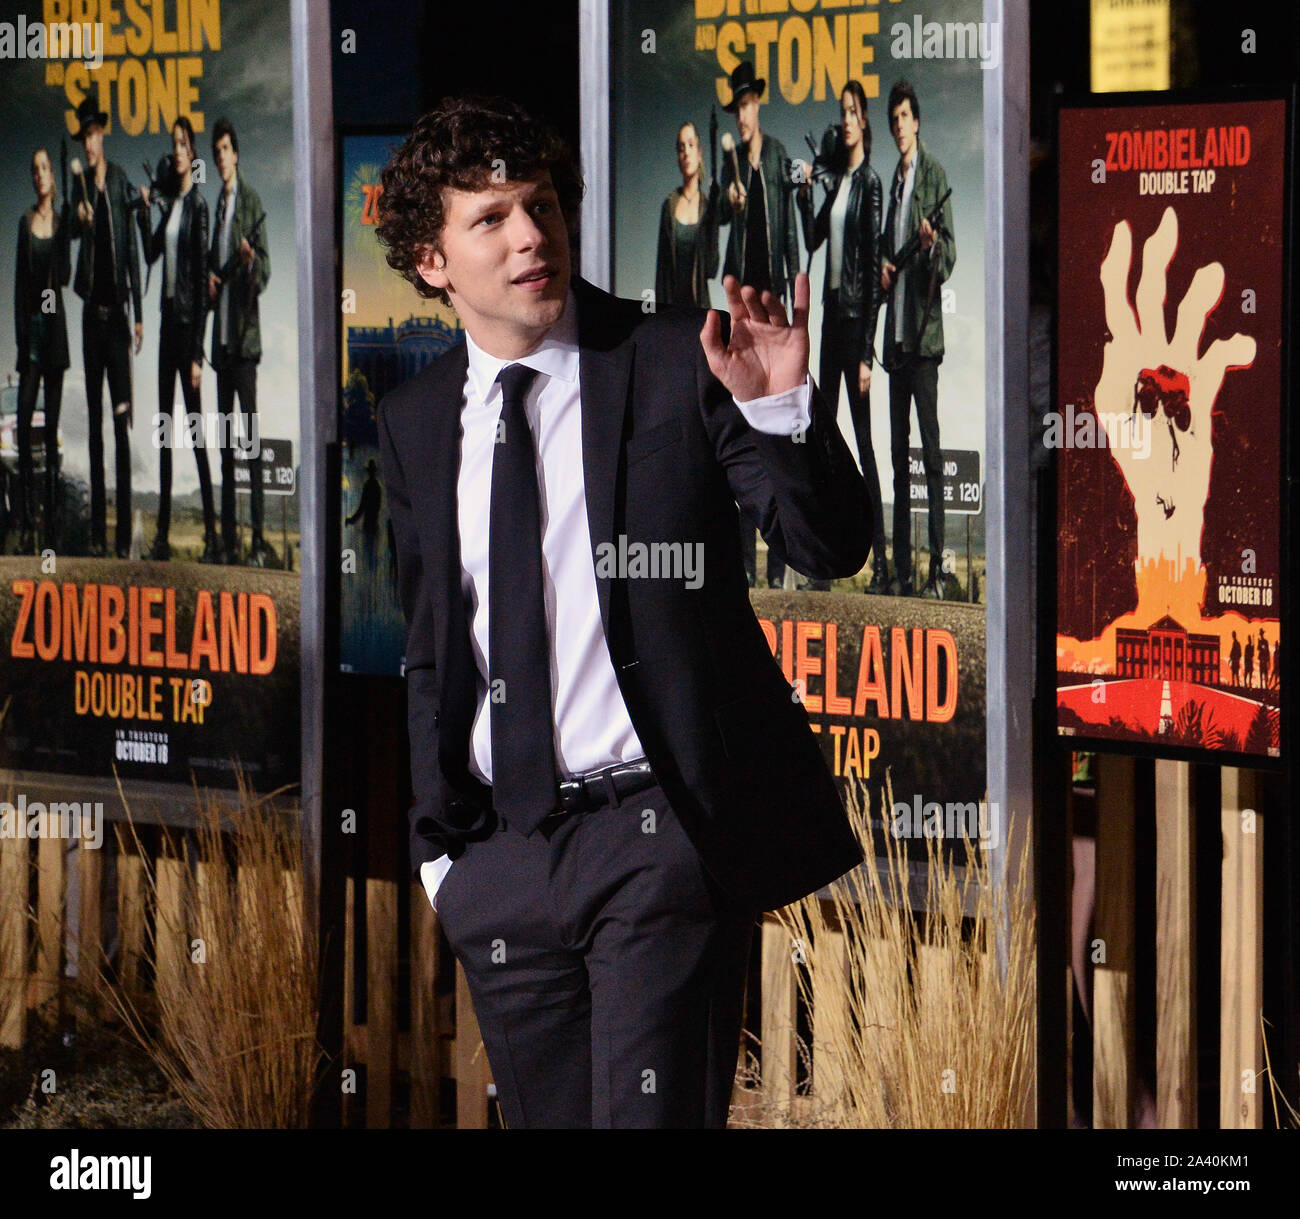 Los Angeles, United States. 10th Oct, 2019. Cast member Jesse Eisenberg attends the premiere of the motion picture horror comedy 'Zombieland: Double Tap' at the Regency Village Theatre in the Westwood section of Los Angeles on Thursday, October 10, 2019. Storyline: Columbus, Tallahassee, Wichita, and Little Rock move to the American heartland as they face off against evolved zombies, fellow survivors, and the growing pains of the snarky makeshift family. Photo by Jim Ruymen/UPI Credit: UPI/Alamy Live News Stock Photo